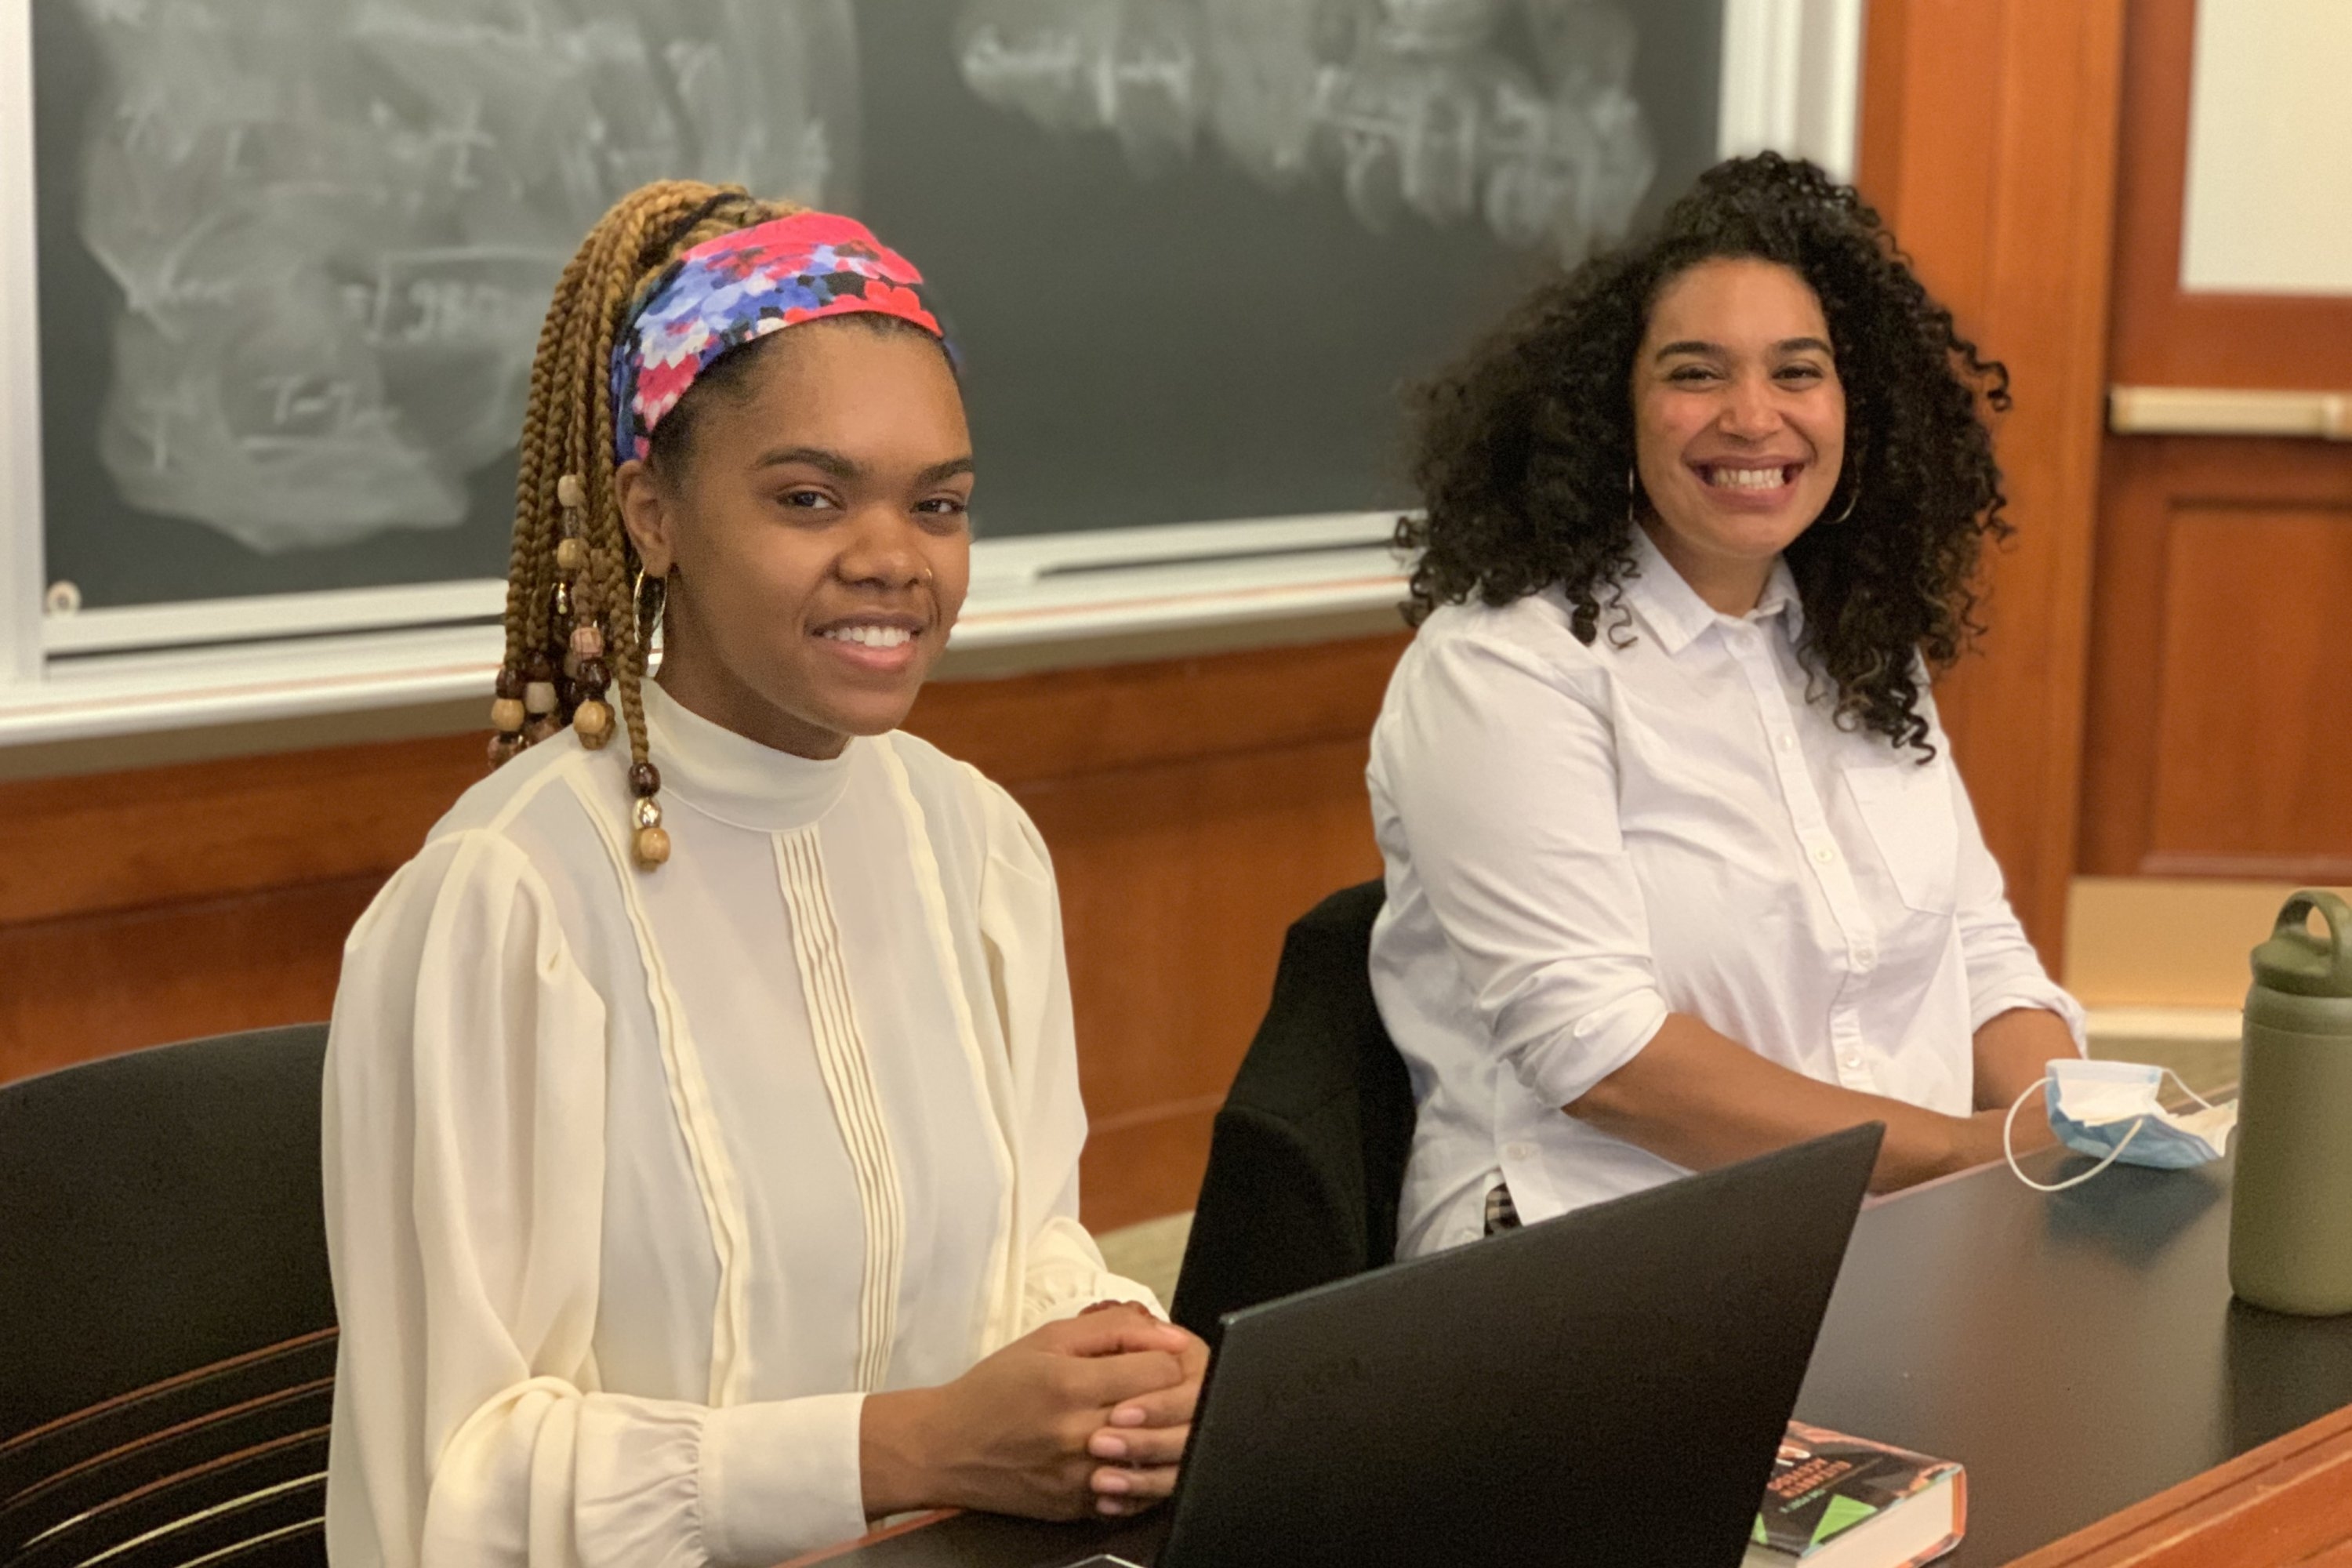 An MIT Reads discussion with author Elizabeth Acevedo (right) was moderated by MIT senior and budding novelist Nailah Smith (left).